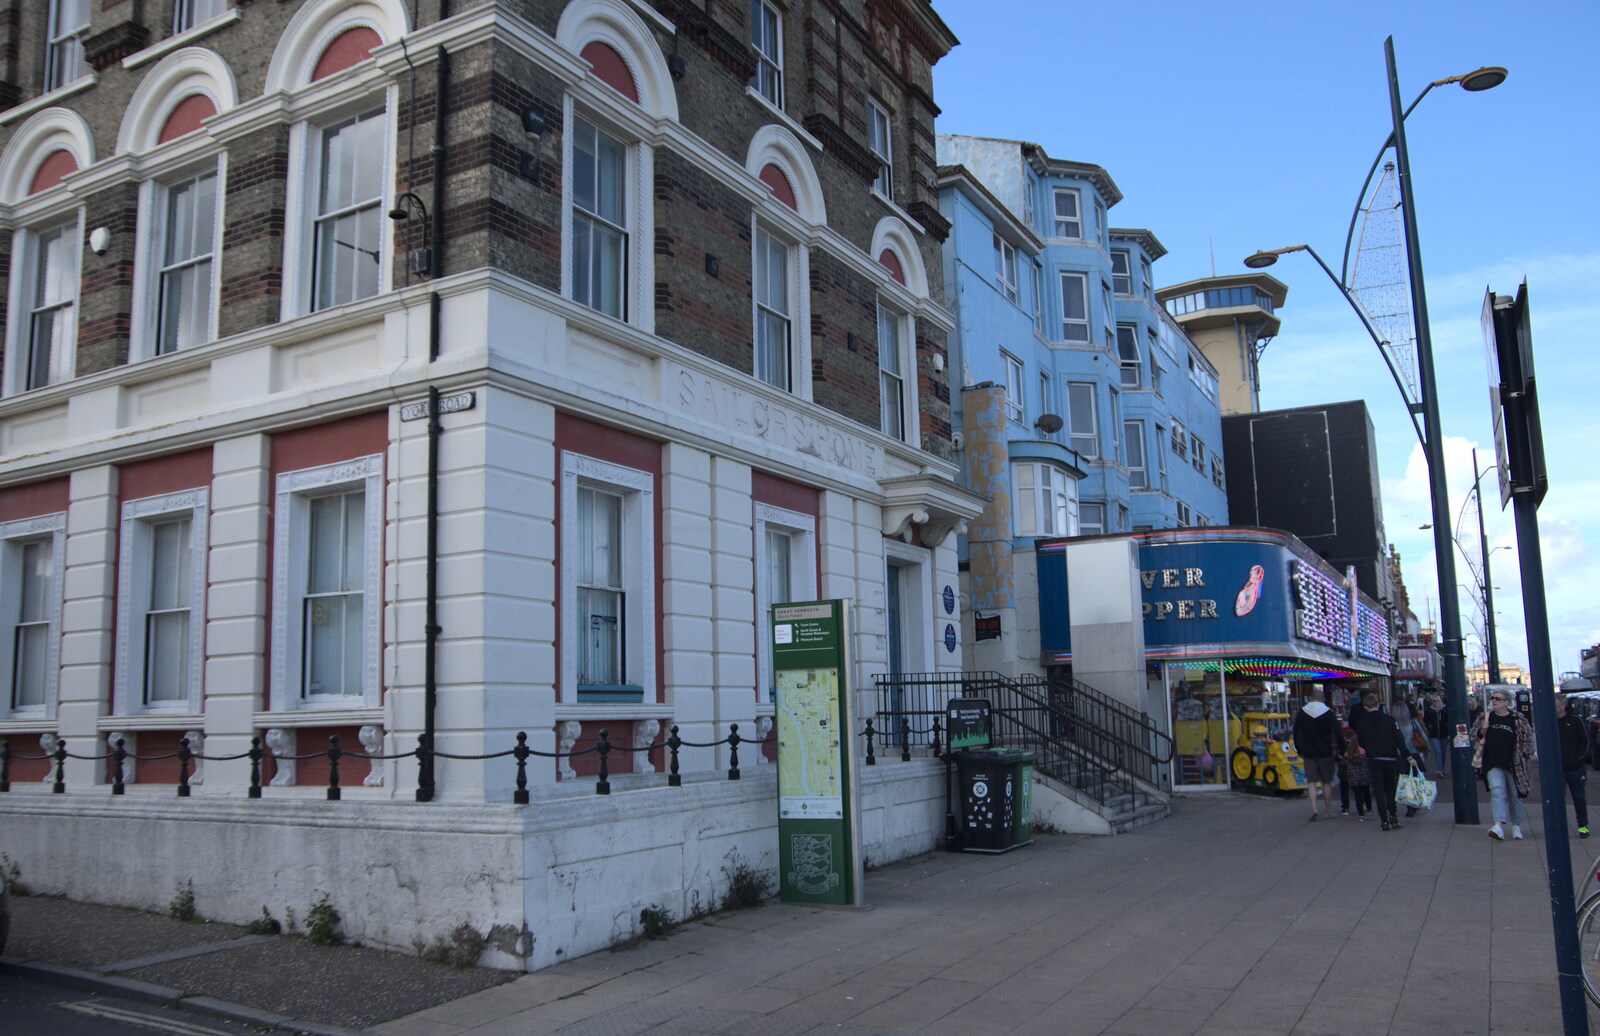 The former Sailors' Home from Faded Seaside Glamour: A Weekend in Great Yarmouth, Norfolk - 29th May 2022